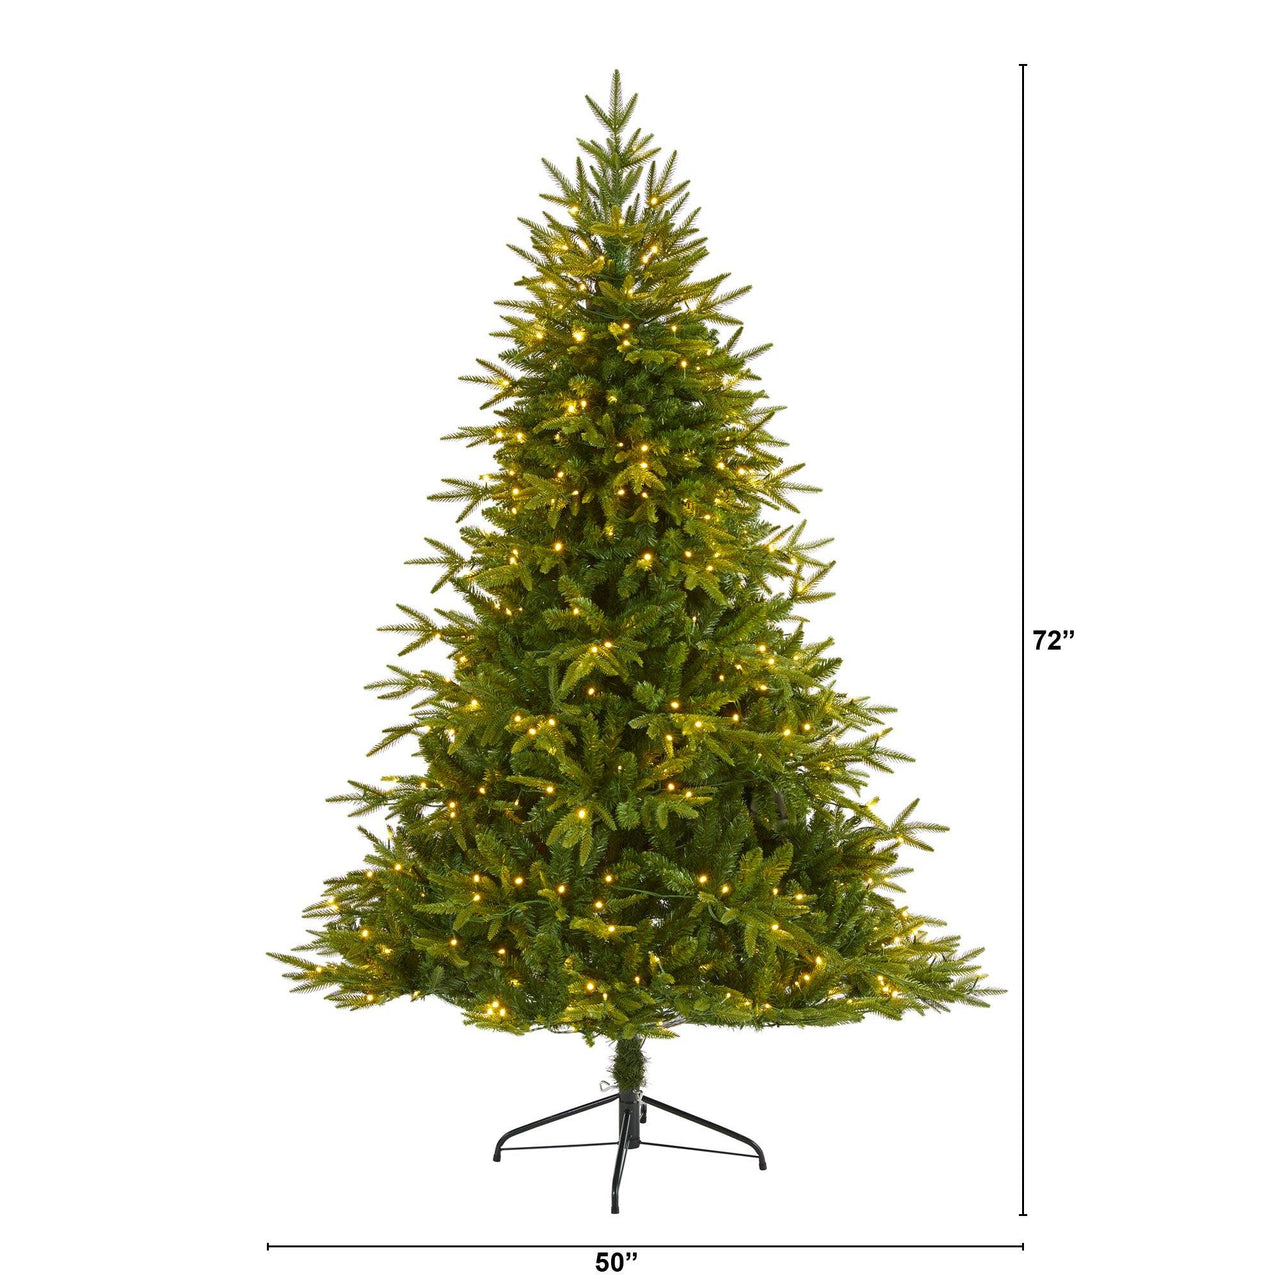 6’ Colorado Mountain Fir “Natural Look” Artificial Christmas Tree with 350 Clear LED Lights and 1704 Bendable Banches - The Fox Decor